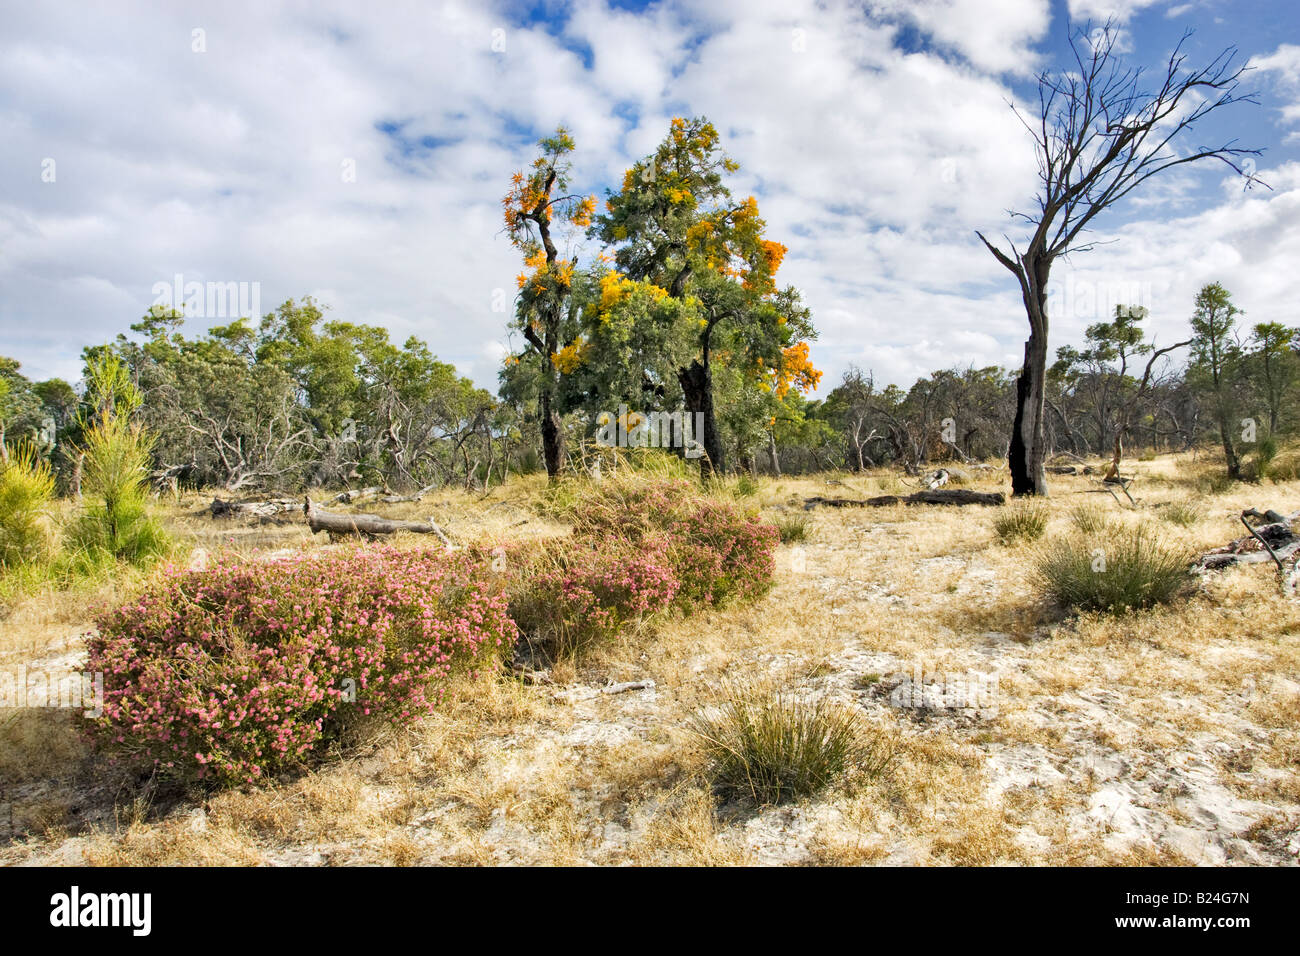 Wildlfowers and Western Australian Christmas Trees growing in Western Australian bushland north of Perth Stock Photo